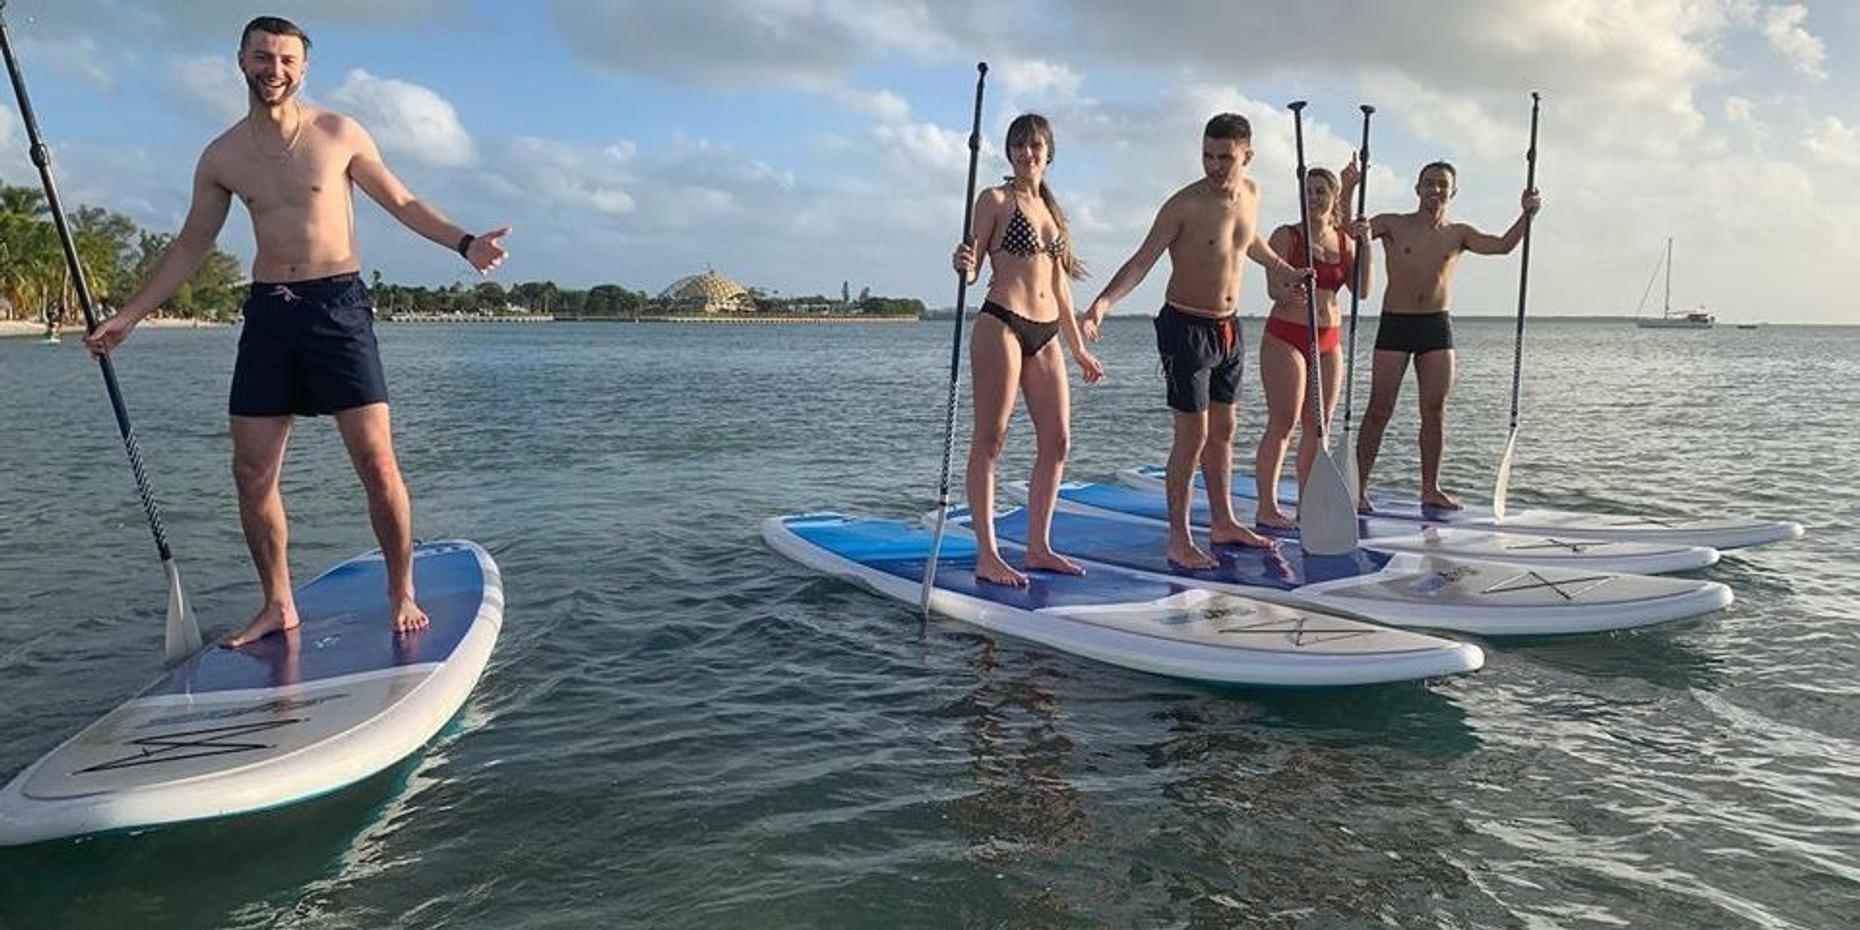 1-Hour Stand Up Paddleboard Rental for 4 people in Miami